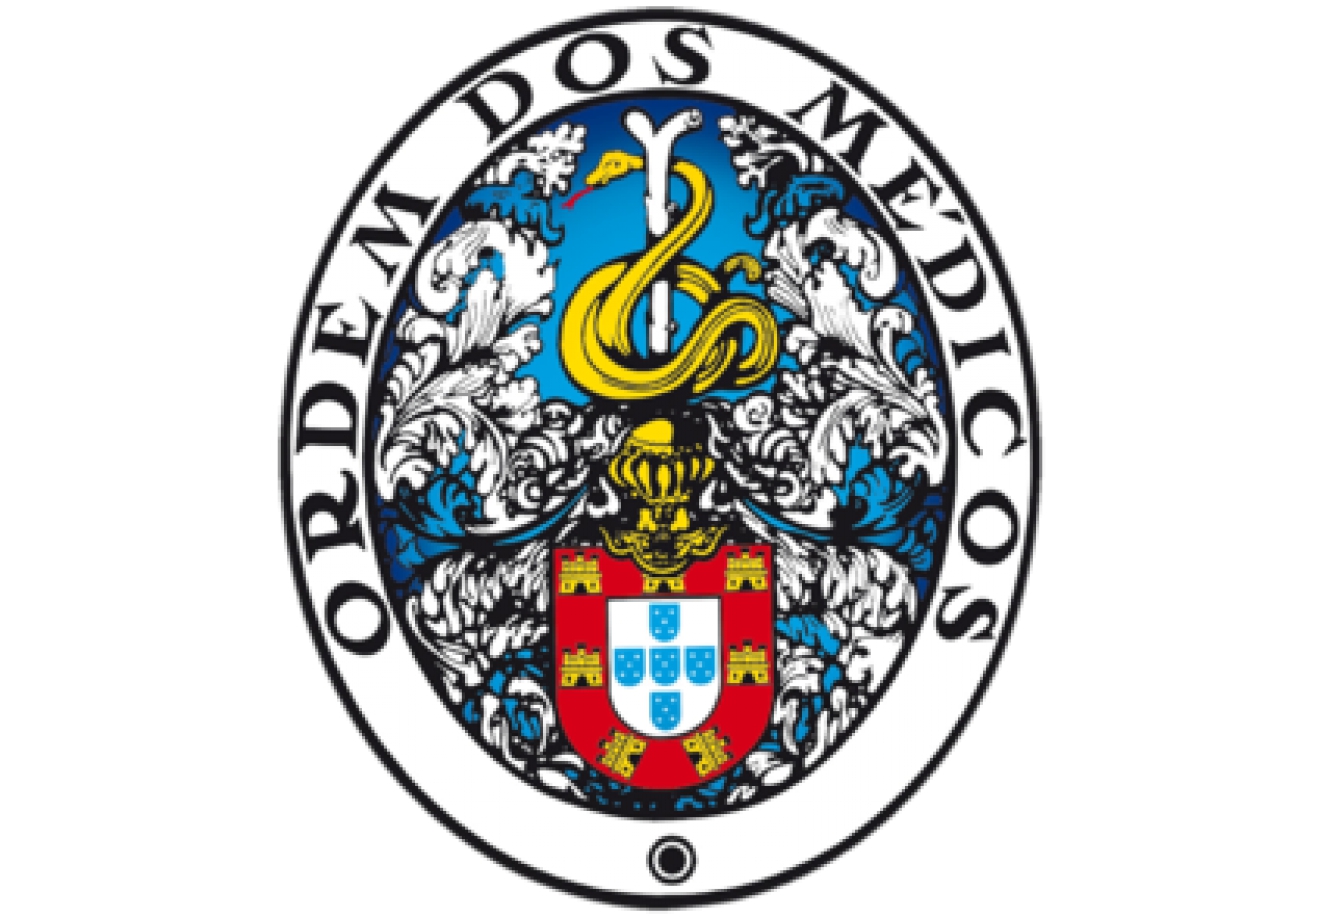 The Portuguese official proposal for the Emergency Medicine Specialty creation